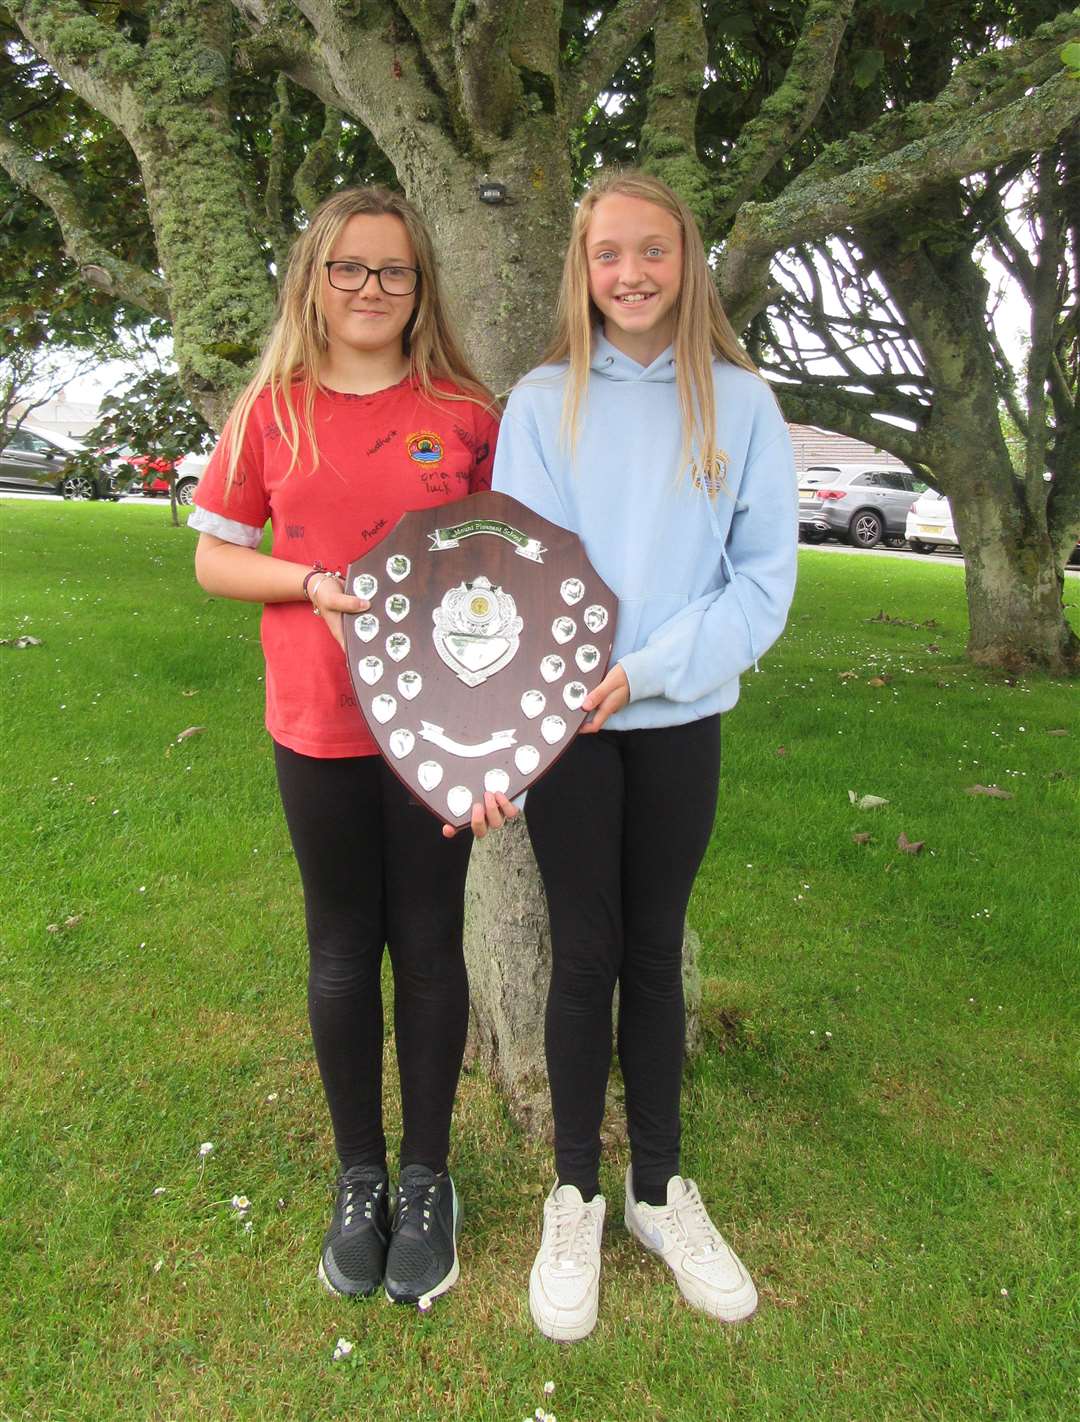 Thor house captains Maddison Morrison and Brooke Cowie with the winners’ shield for their team.